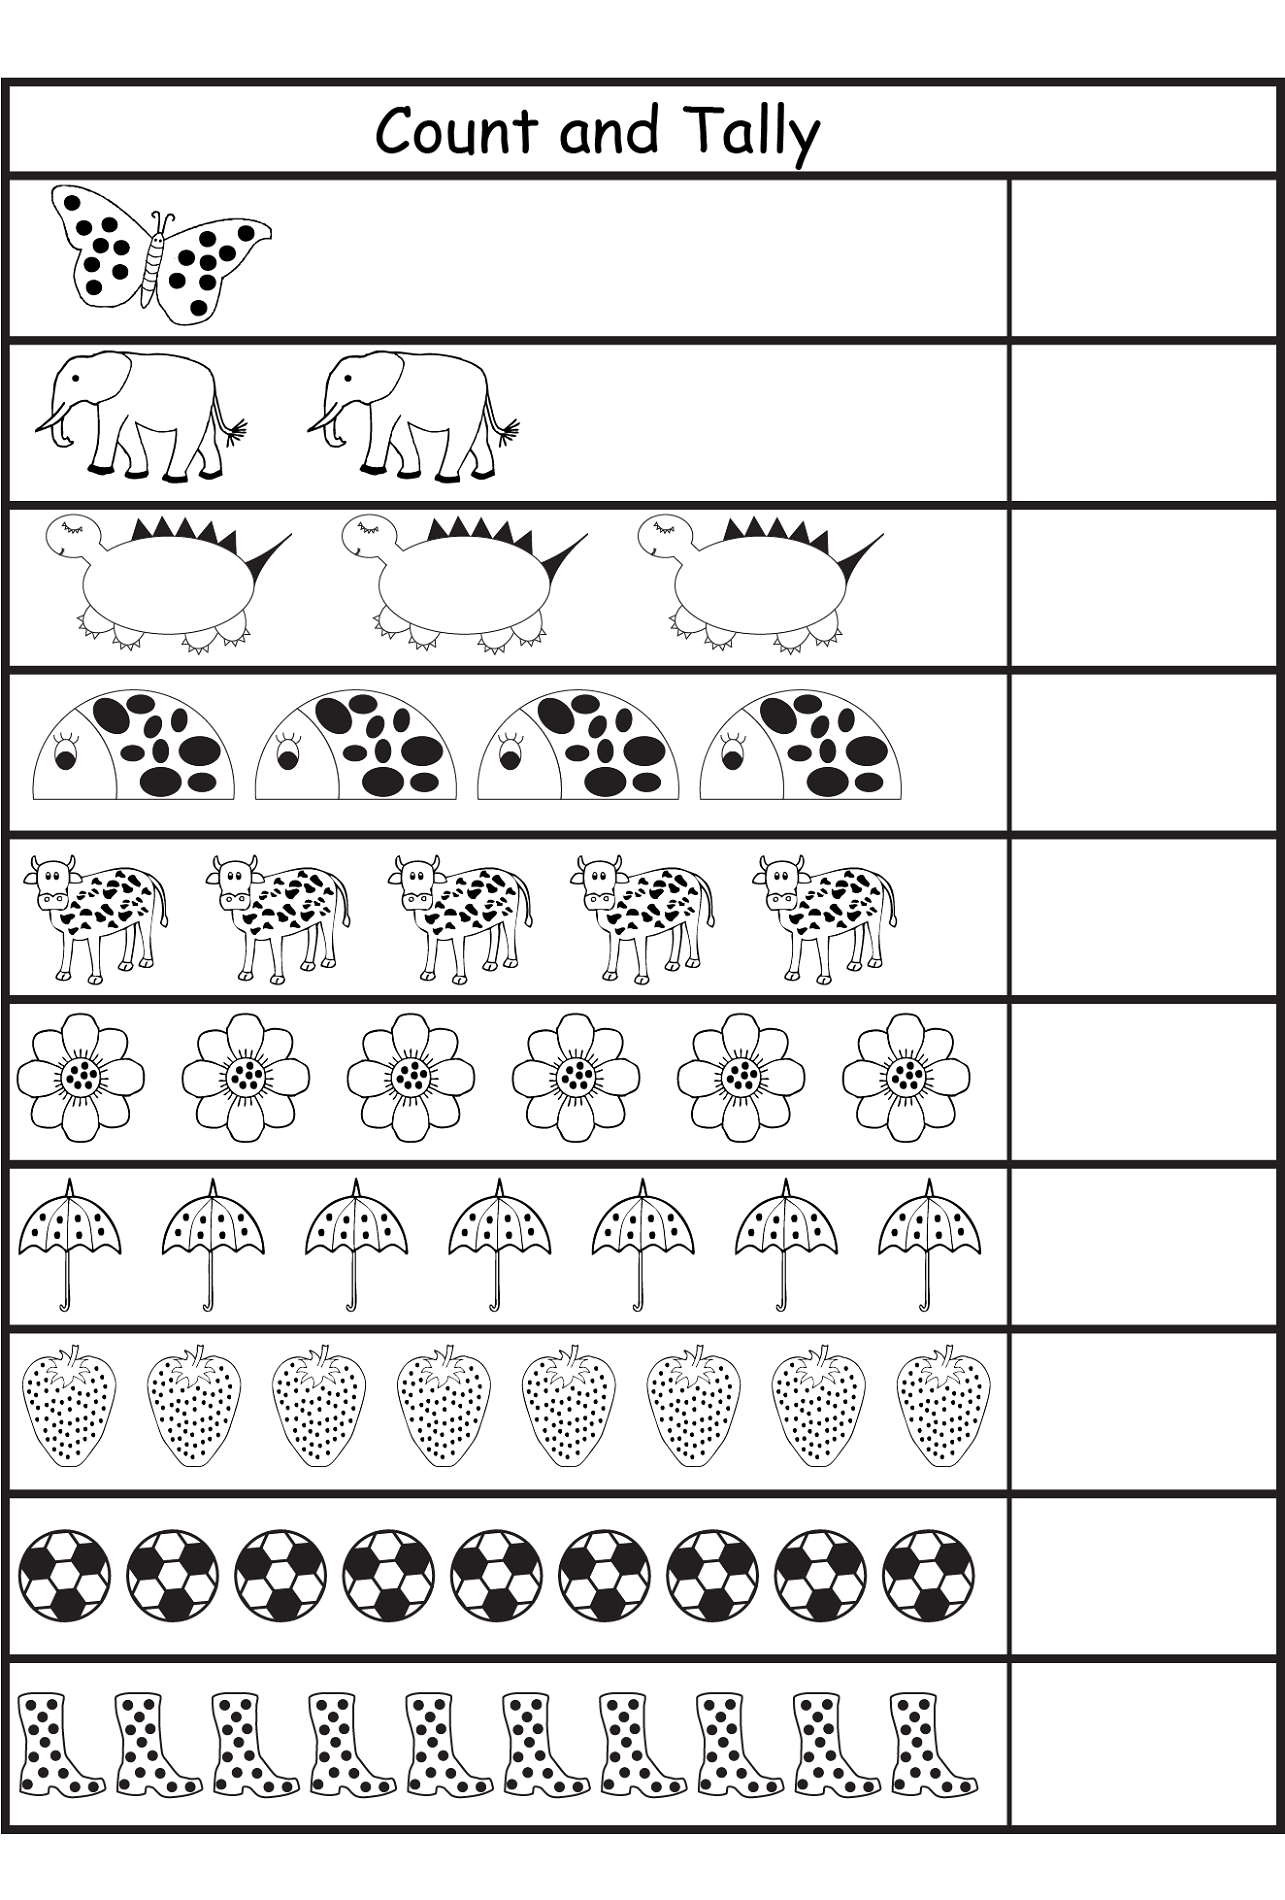 Tally Chart Worksheets for Kids | Activity Shelter